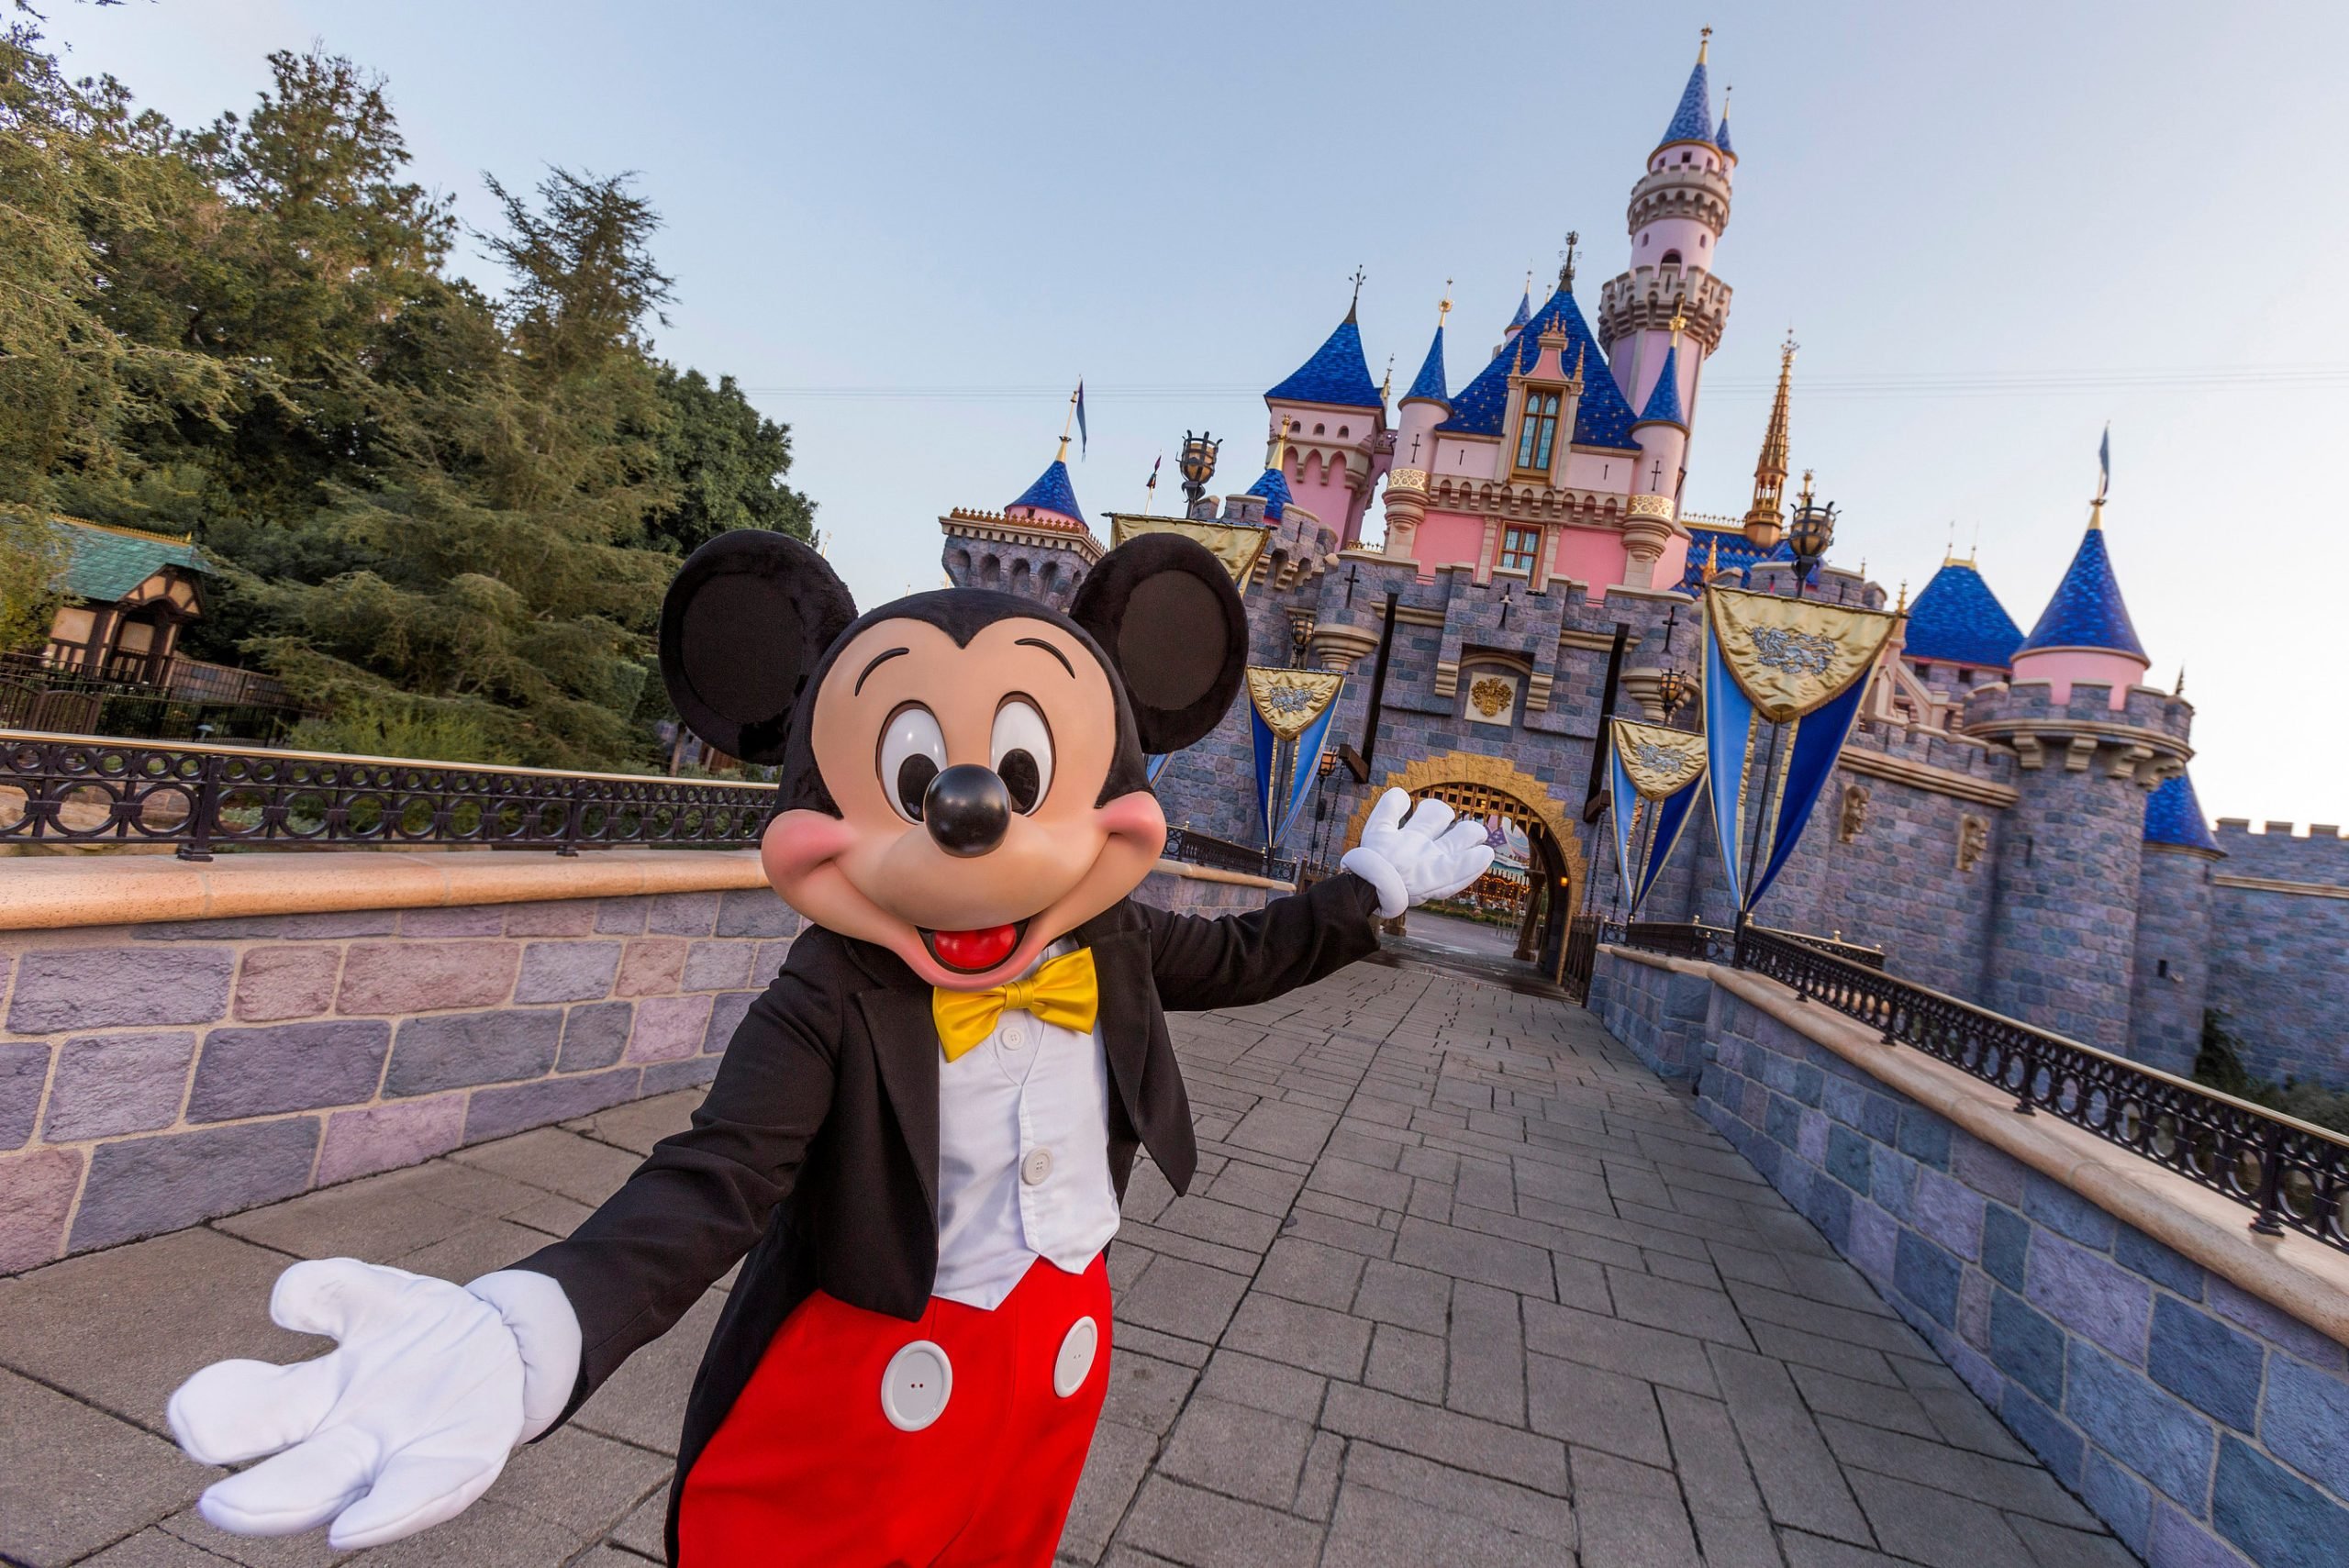 Disneyland vs Walt Disney World: What Are the Differences?